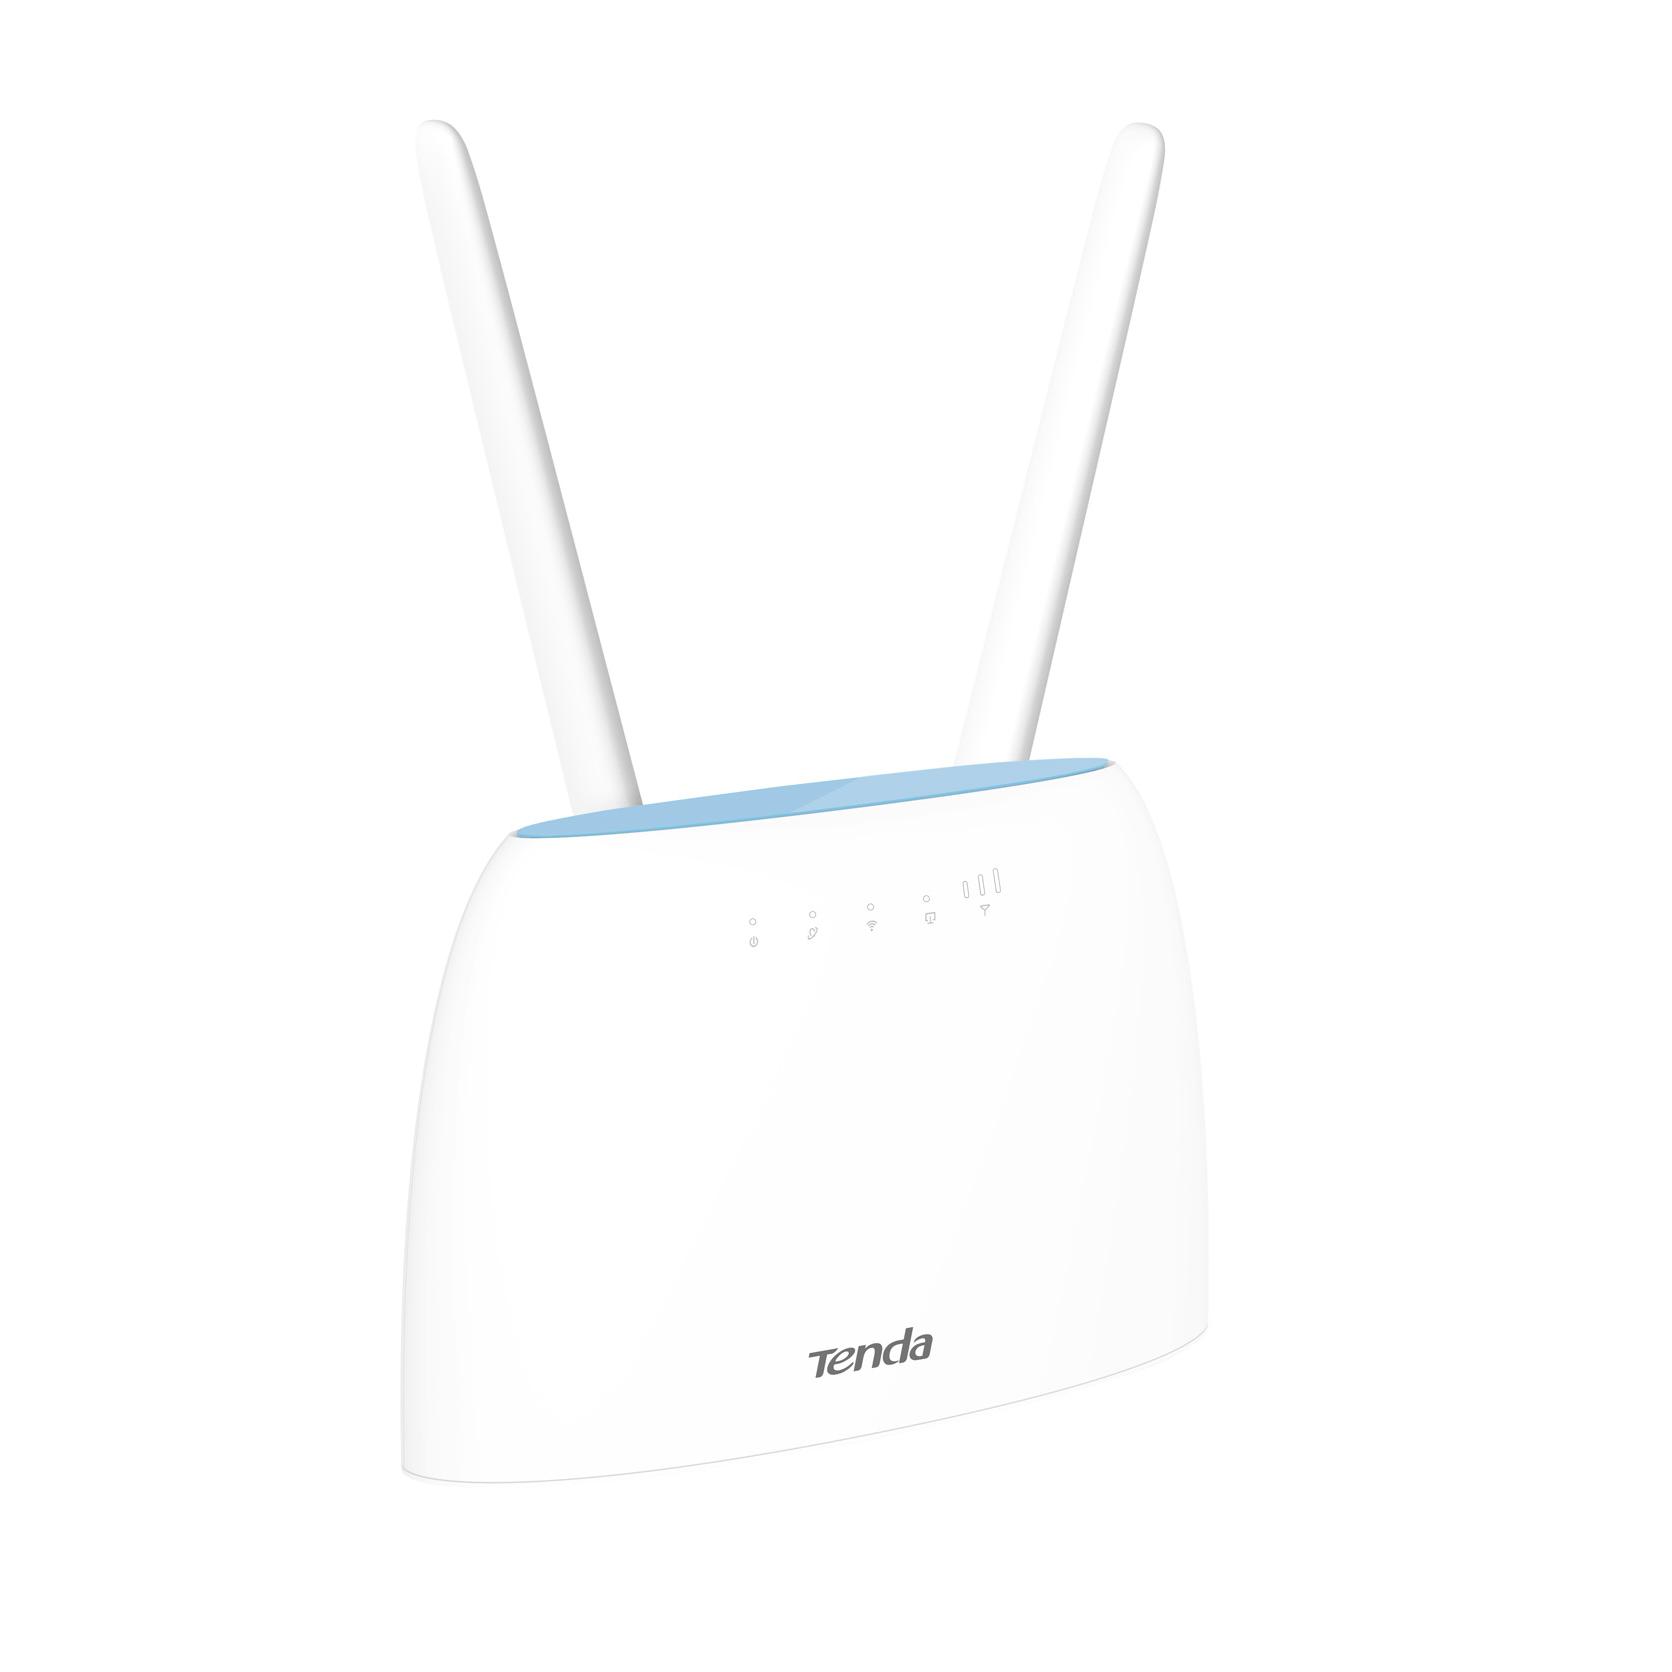 Router Wireless Dual Band 4G LTE, 4G09